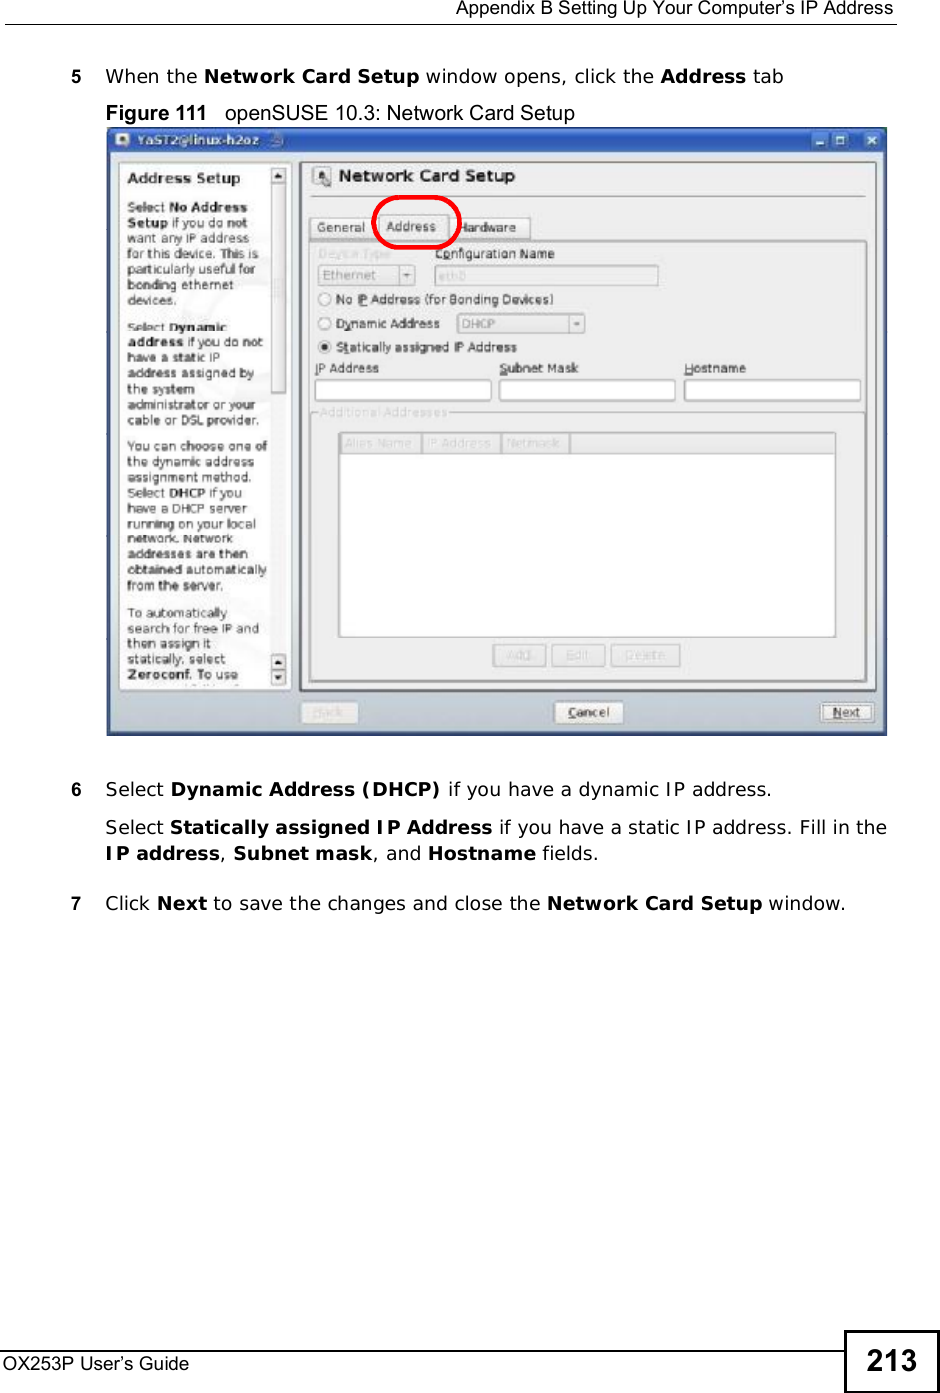  Appendix BSetting Up Your Computer’s IP AddressOX253P User’s Guide 2135When the Network Card Setup window opens, click the Address tabFigure 111   openSUSE 10.3: Network Card Setup6Select Dynamic Address (DHCP) if you have a dynamic IP address.Select Statically assigned IP Address if you have a static IP address. Fill in the IP address,Subnet mask, and Hostname fields.7Click Next to save the changes and close the Network Card Setup window. 